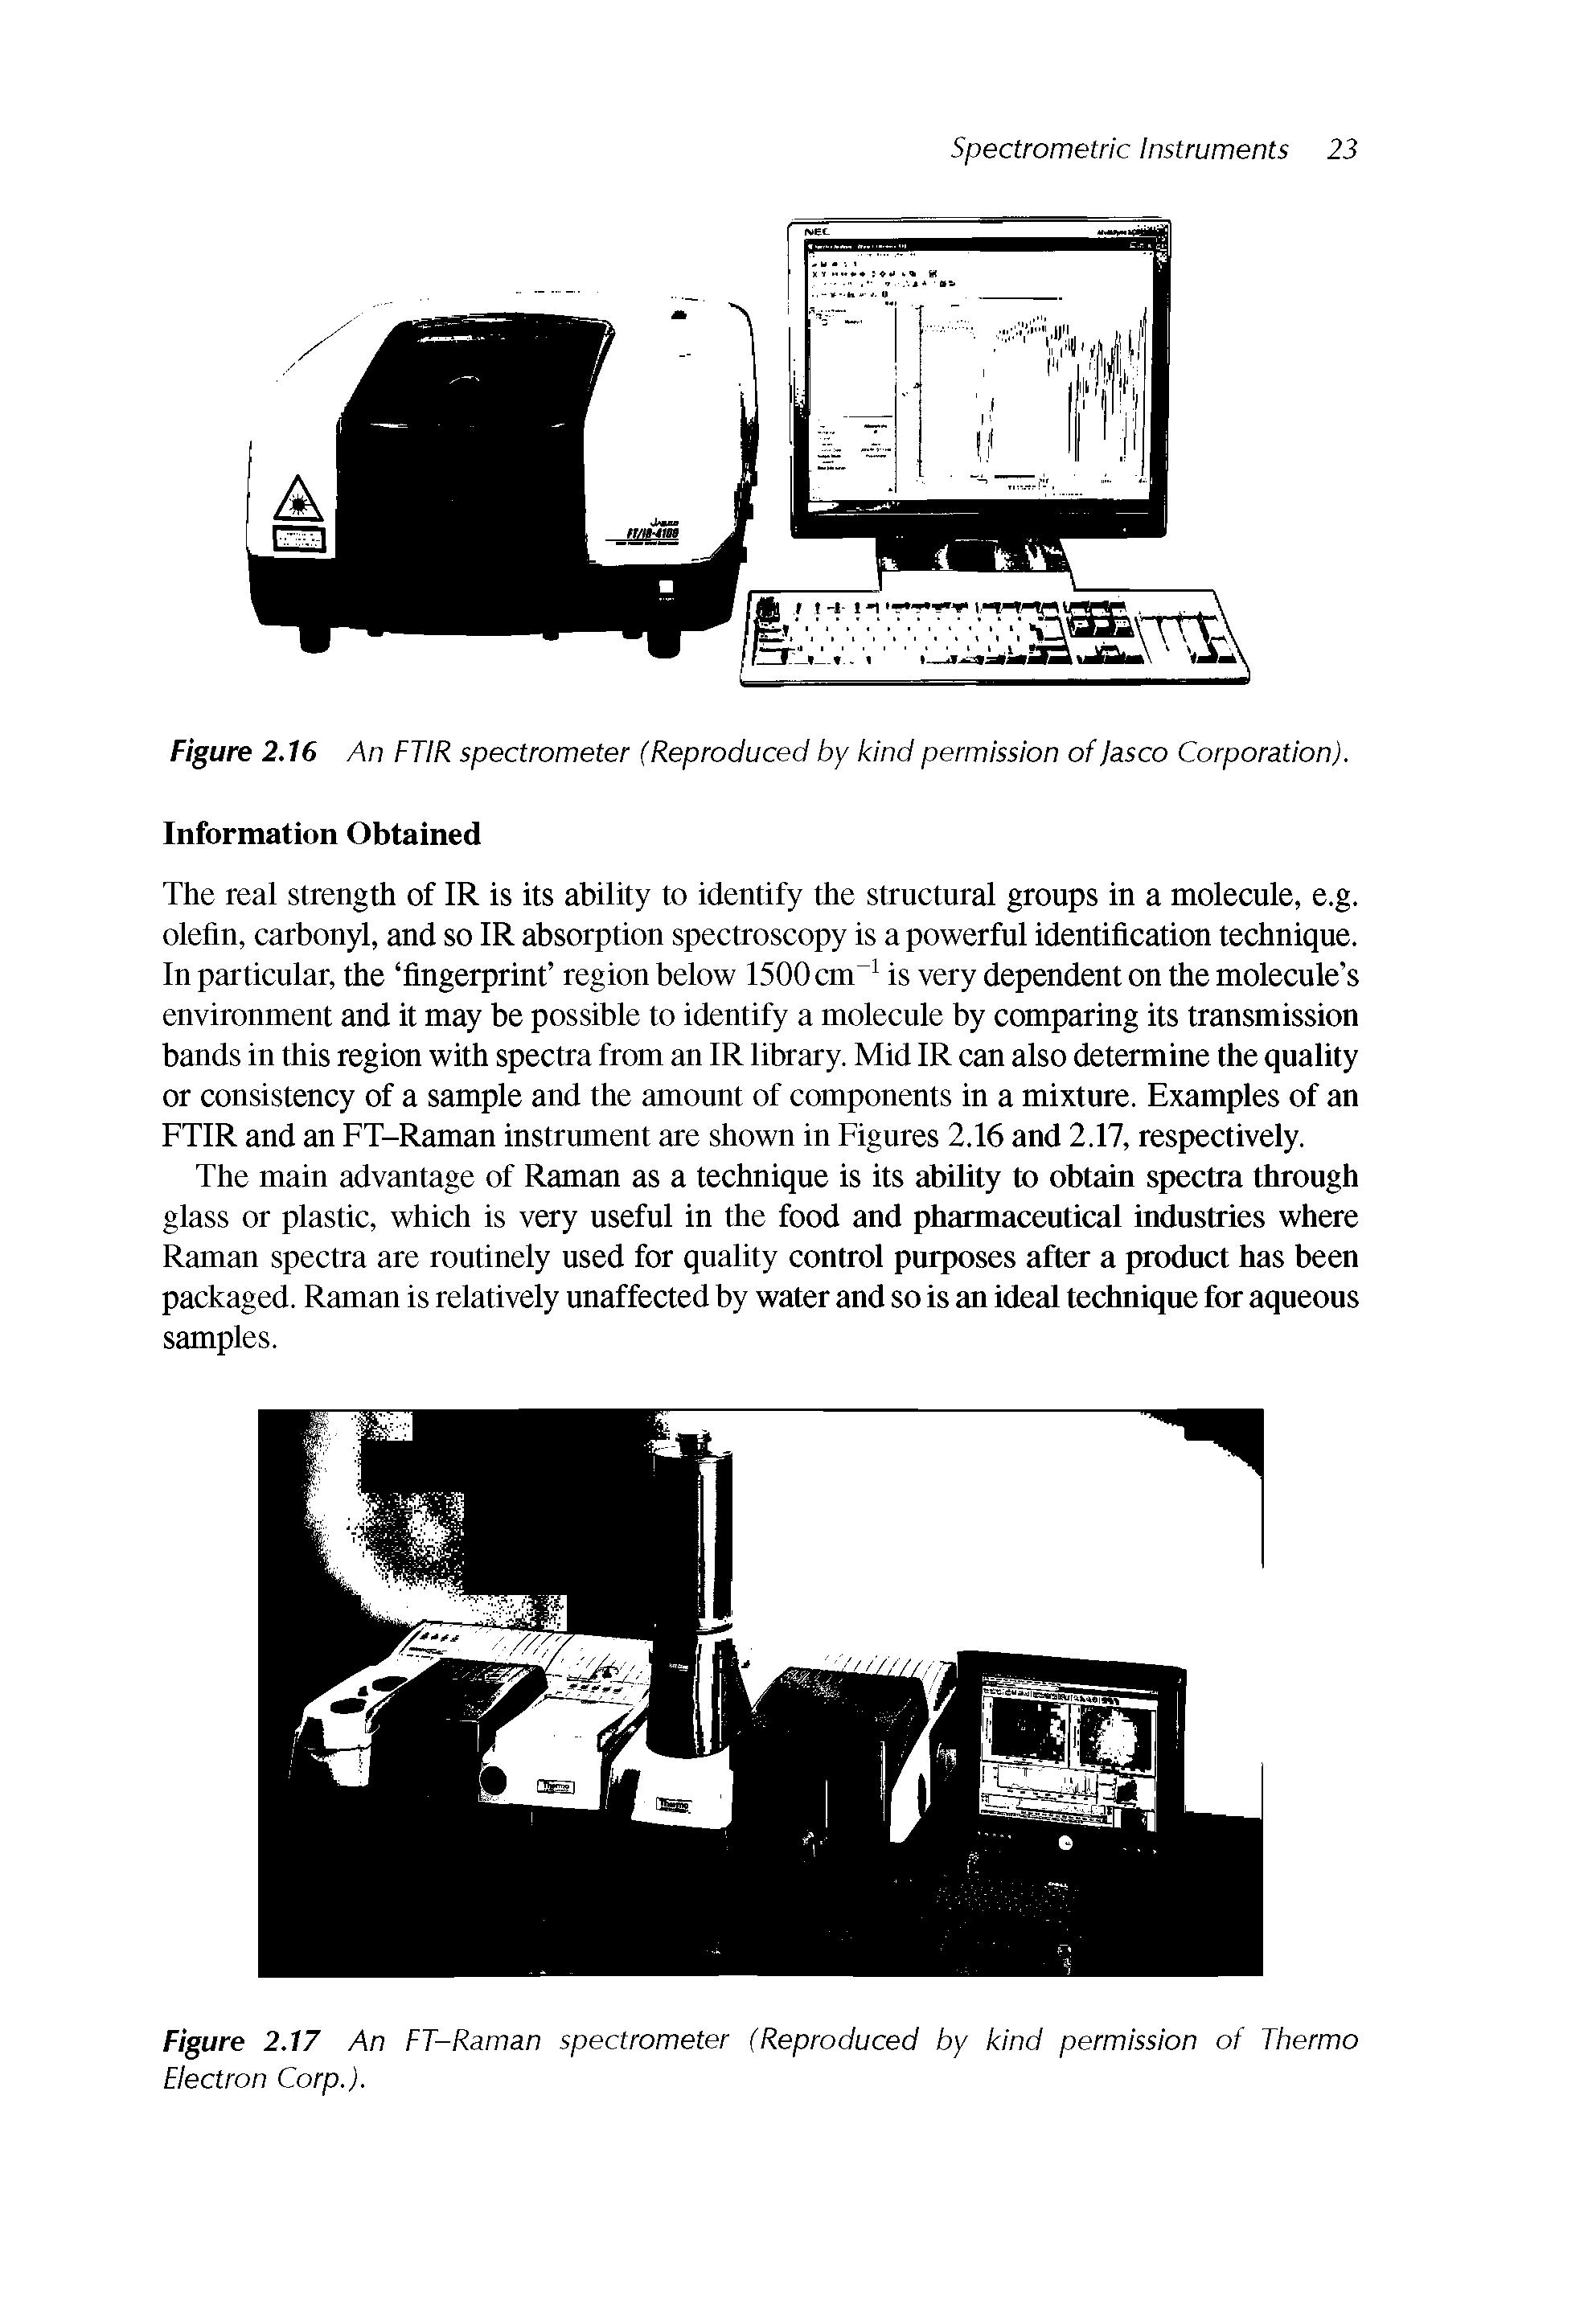 Figure 2.16 An FTIR spectrometer (Reproduced by kind permission of Jasco Corporation). Information Obtained...